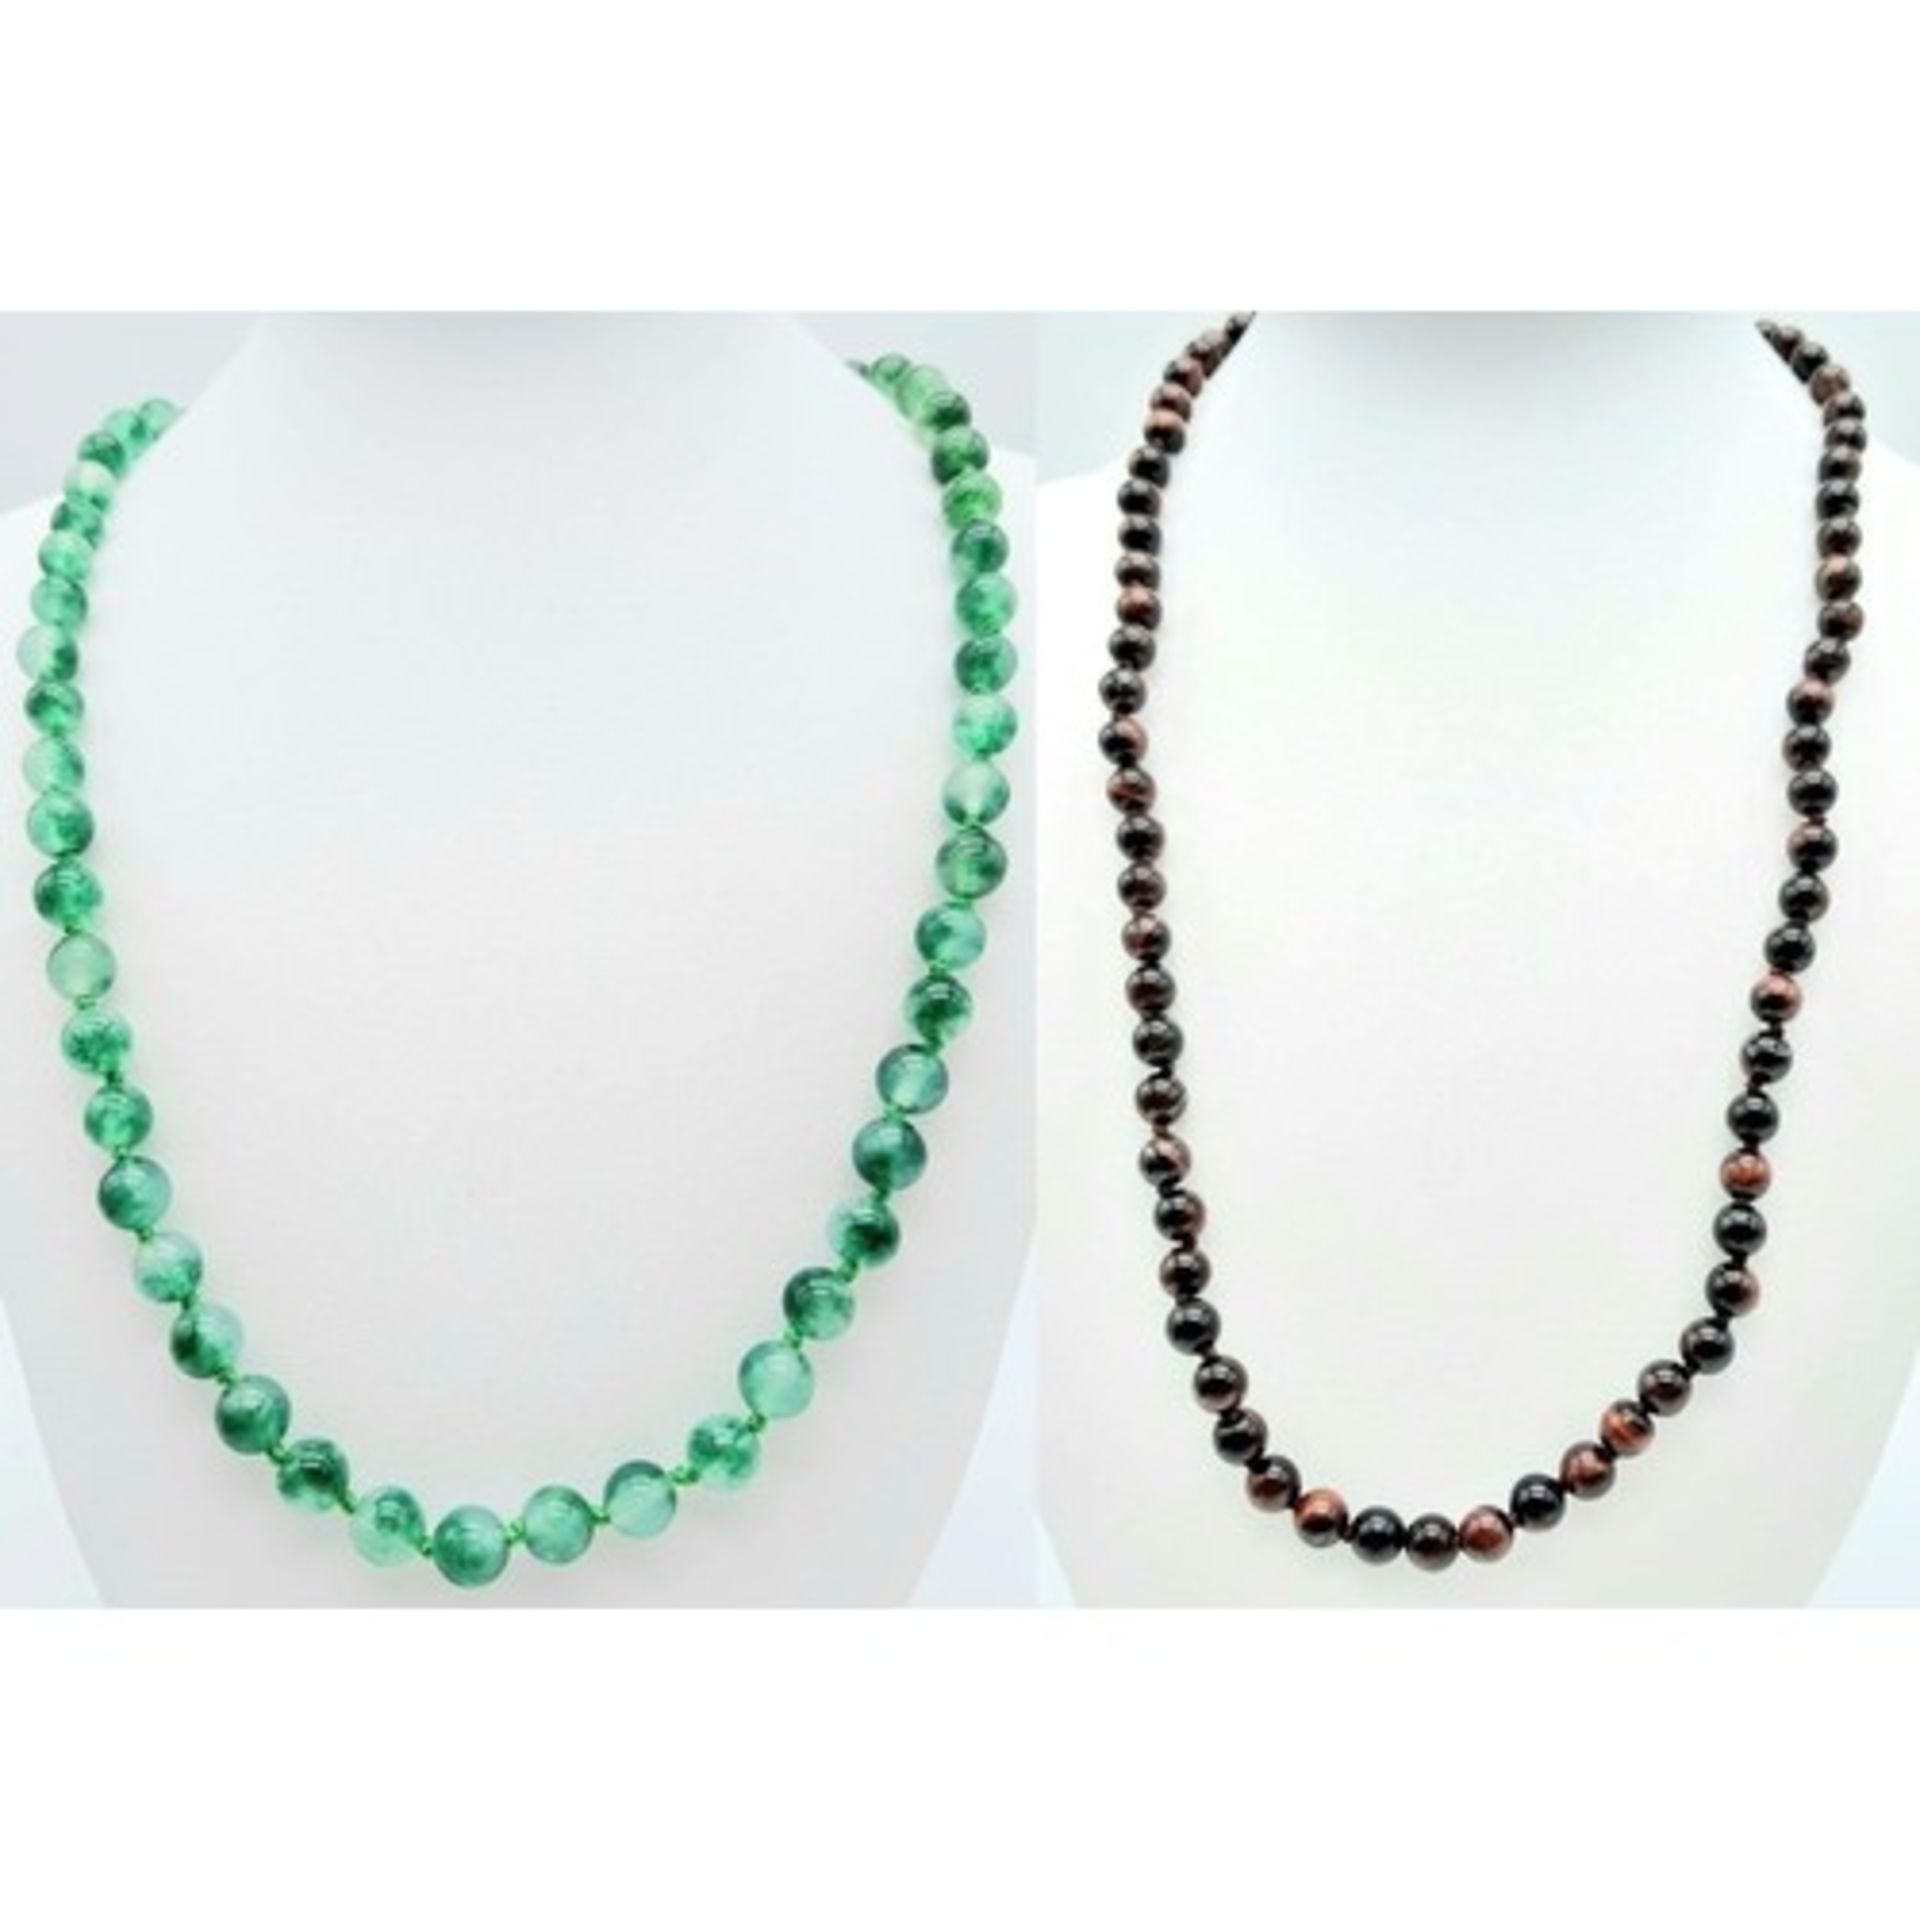 Duo of Beaded Necklaces. One Jade Green stone and one Iridescent Black/Orange stone. Both